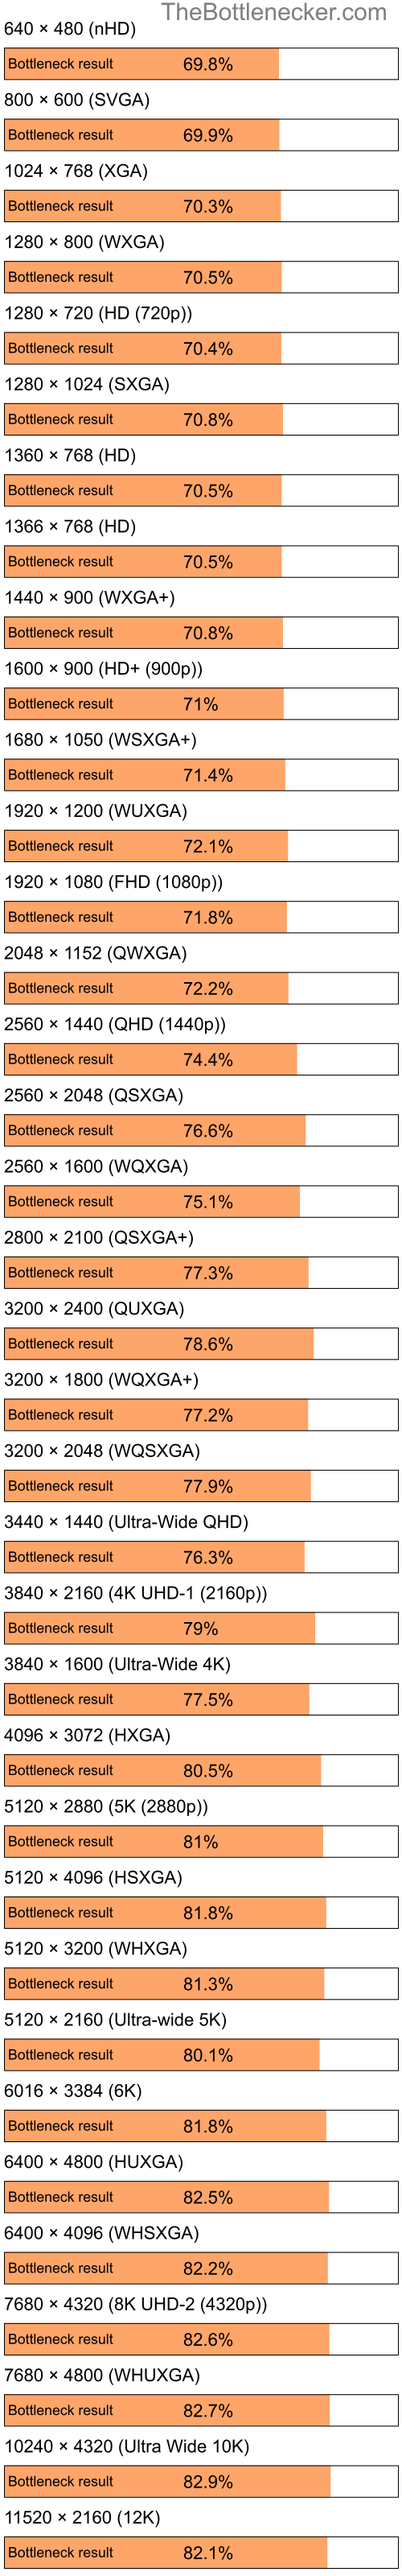 Bottleneck results by resolution for Intel Celeron M 410 and AMD Mobility Radeon HD 3430 in Graphic Card Intense Tasks